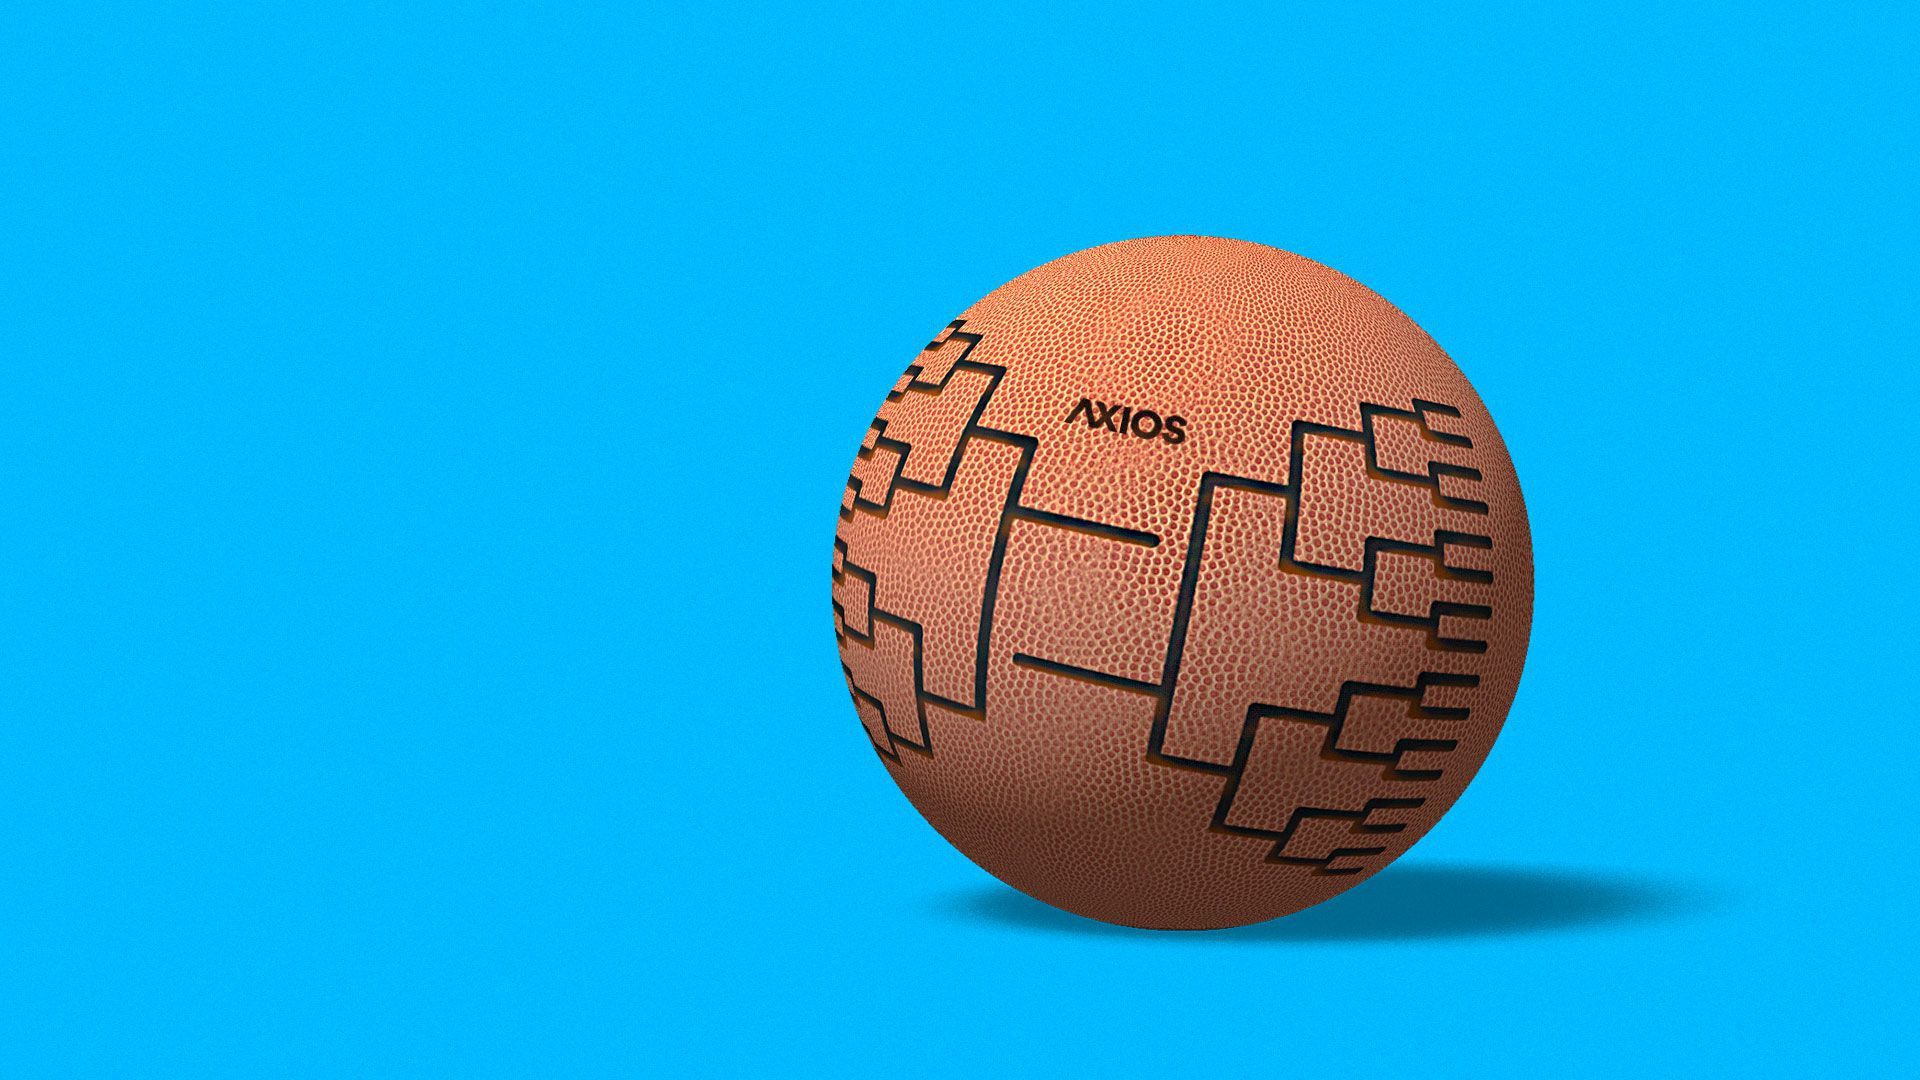 Basketball with Axios bracket on it